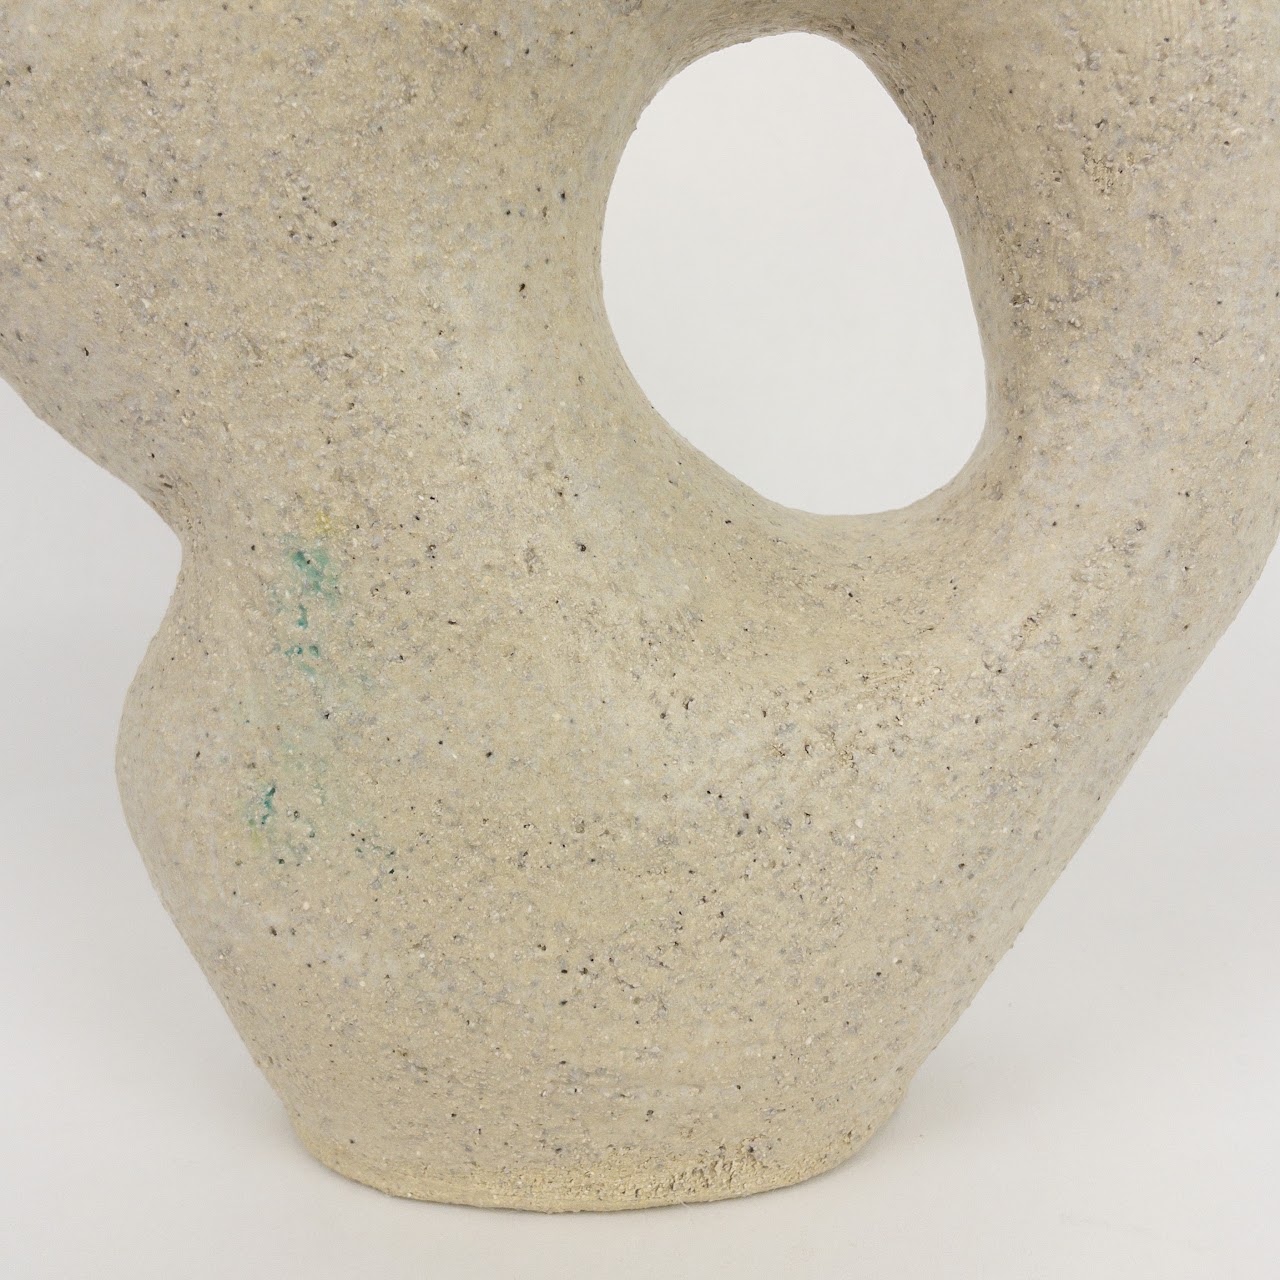 Lost Quarry Abstract Vase